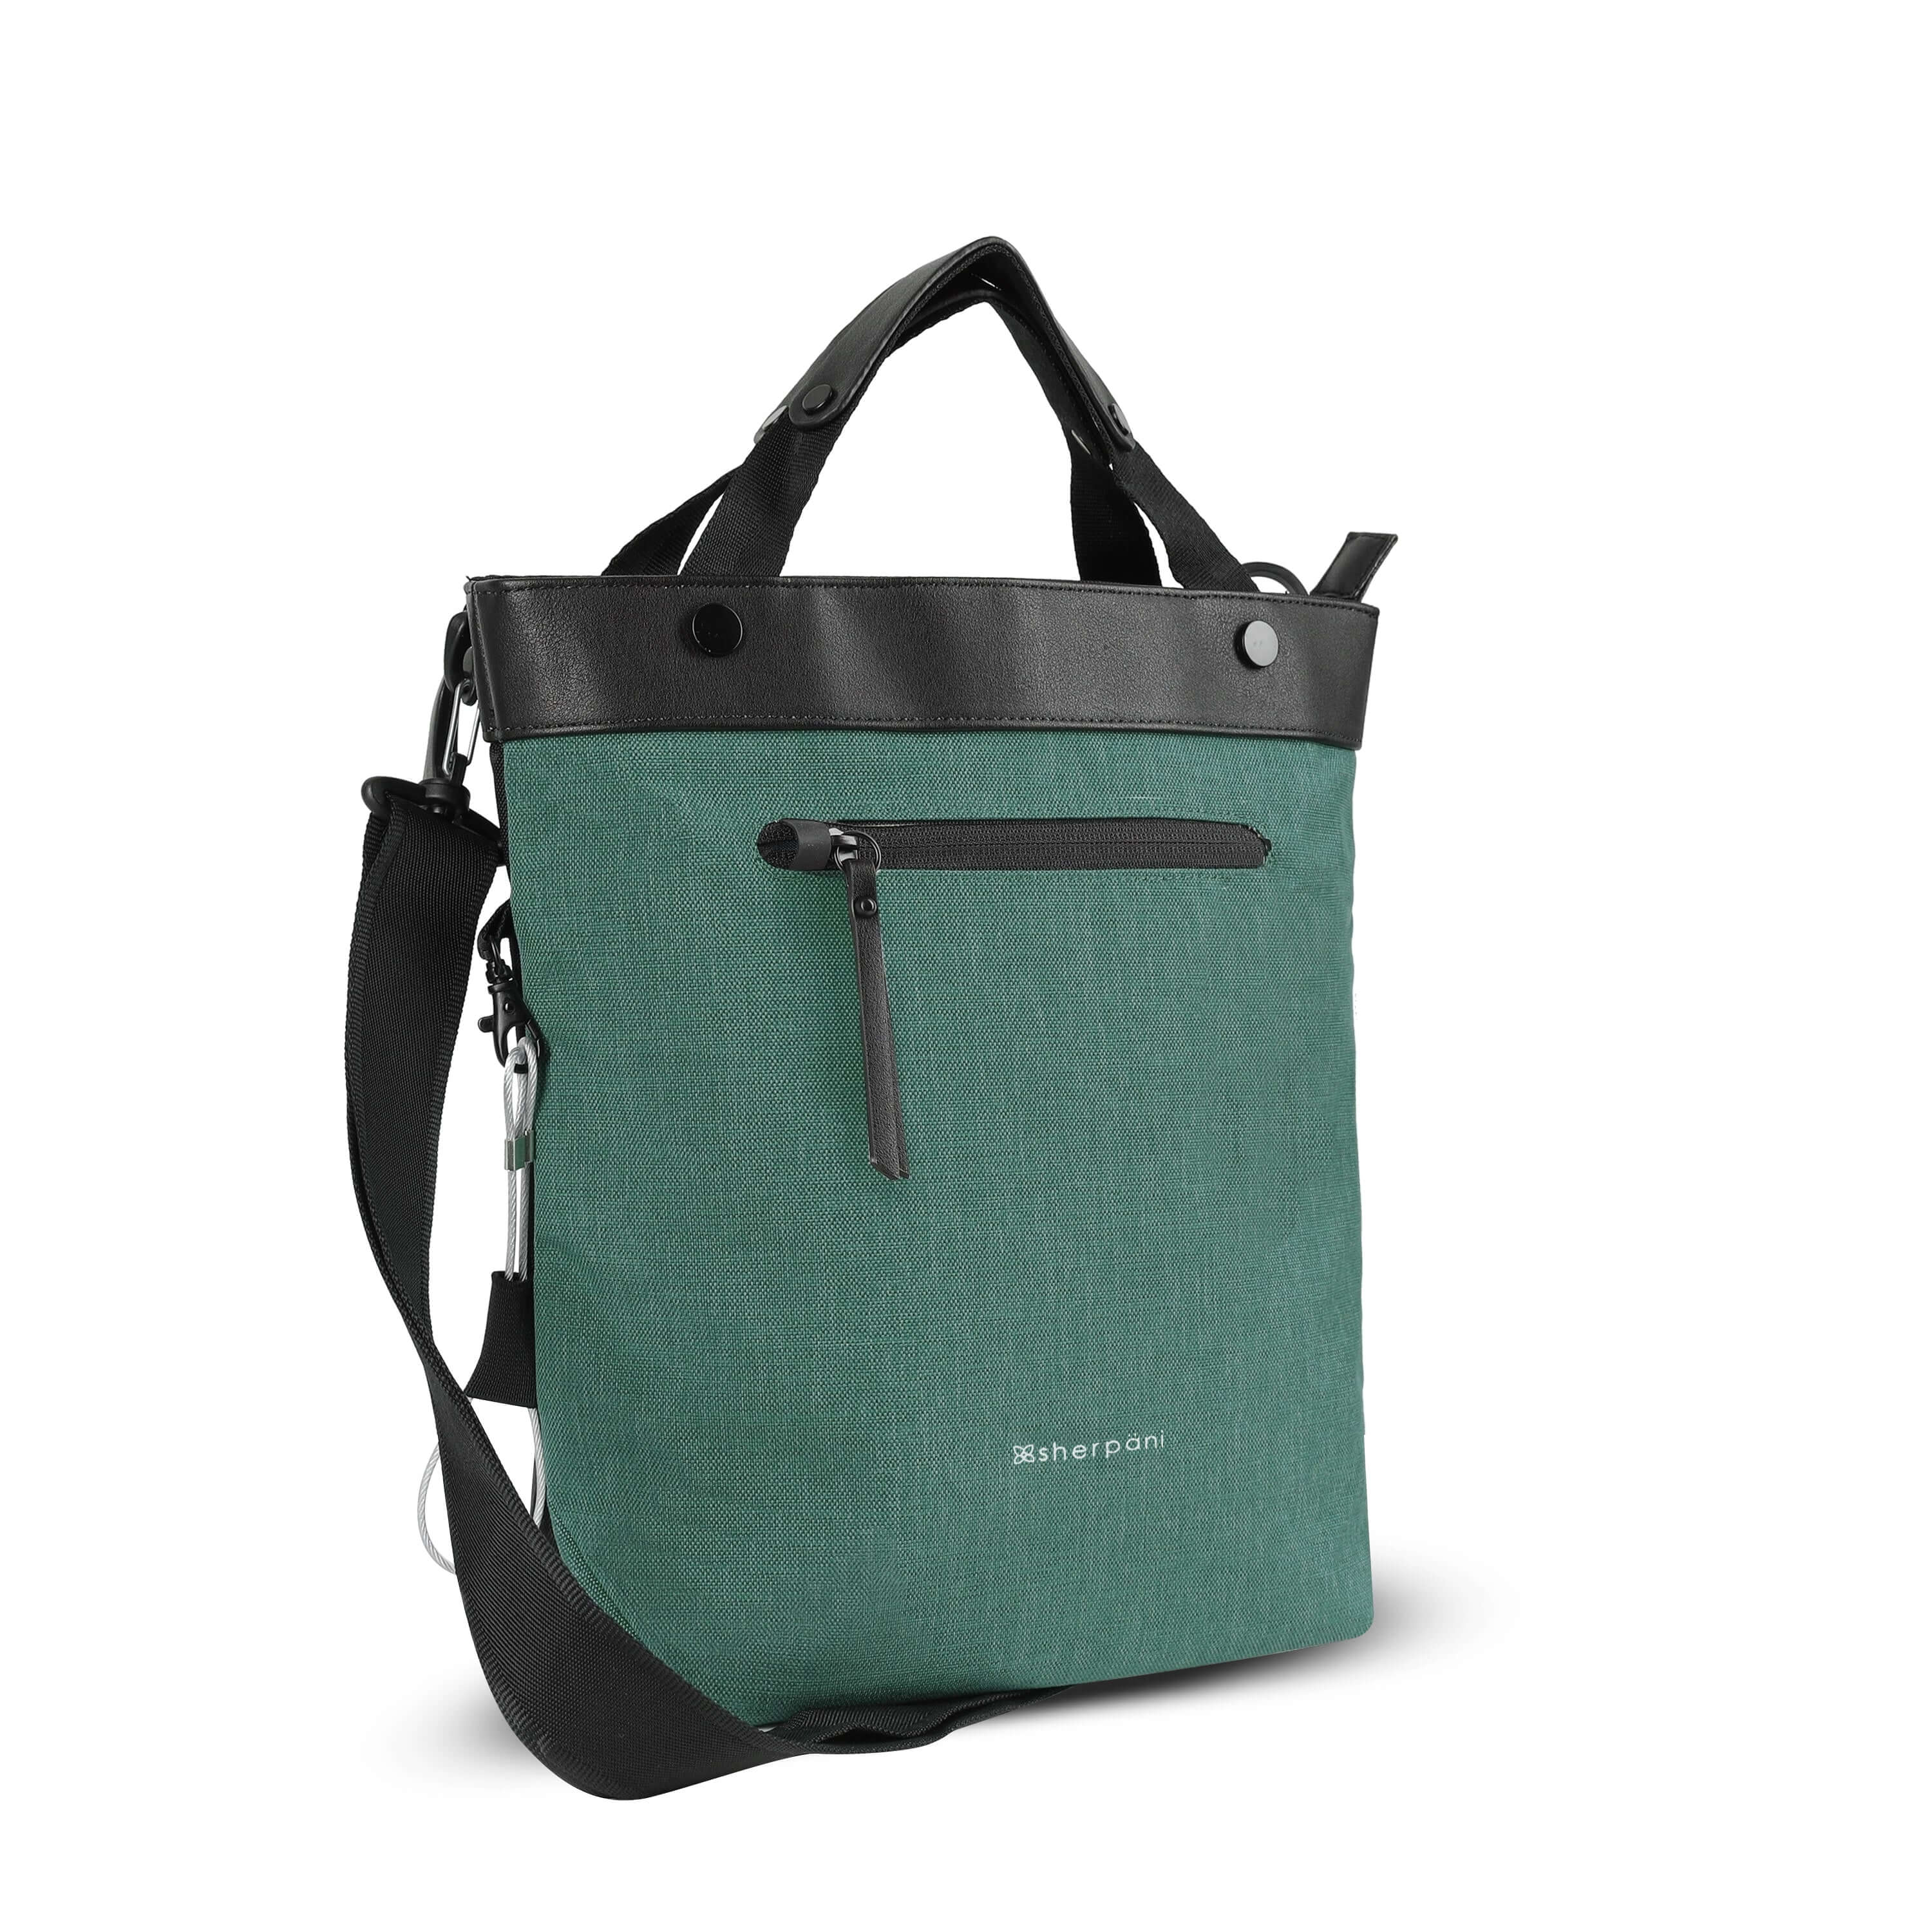 Angled front view of Sherpani's Anti-Theft bag, the Geo AT in Teal, with vegan leather accents in black. The bag features short tote handles and an adjustable/detachable crossbody strap. There is a locking zipper compartment on the front. A chair loop lock is clipped to the side and secured in place by an elastic tab.